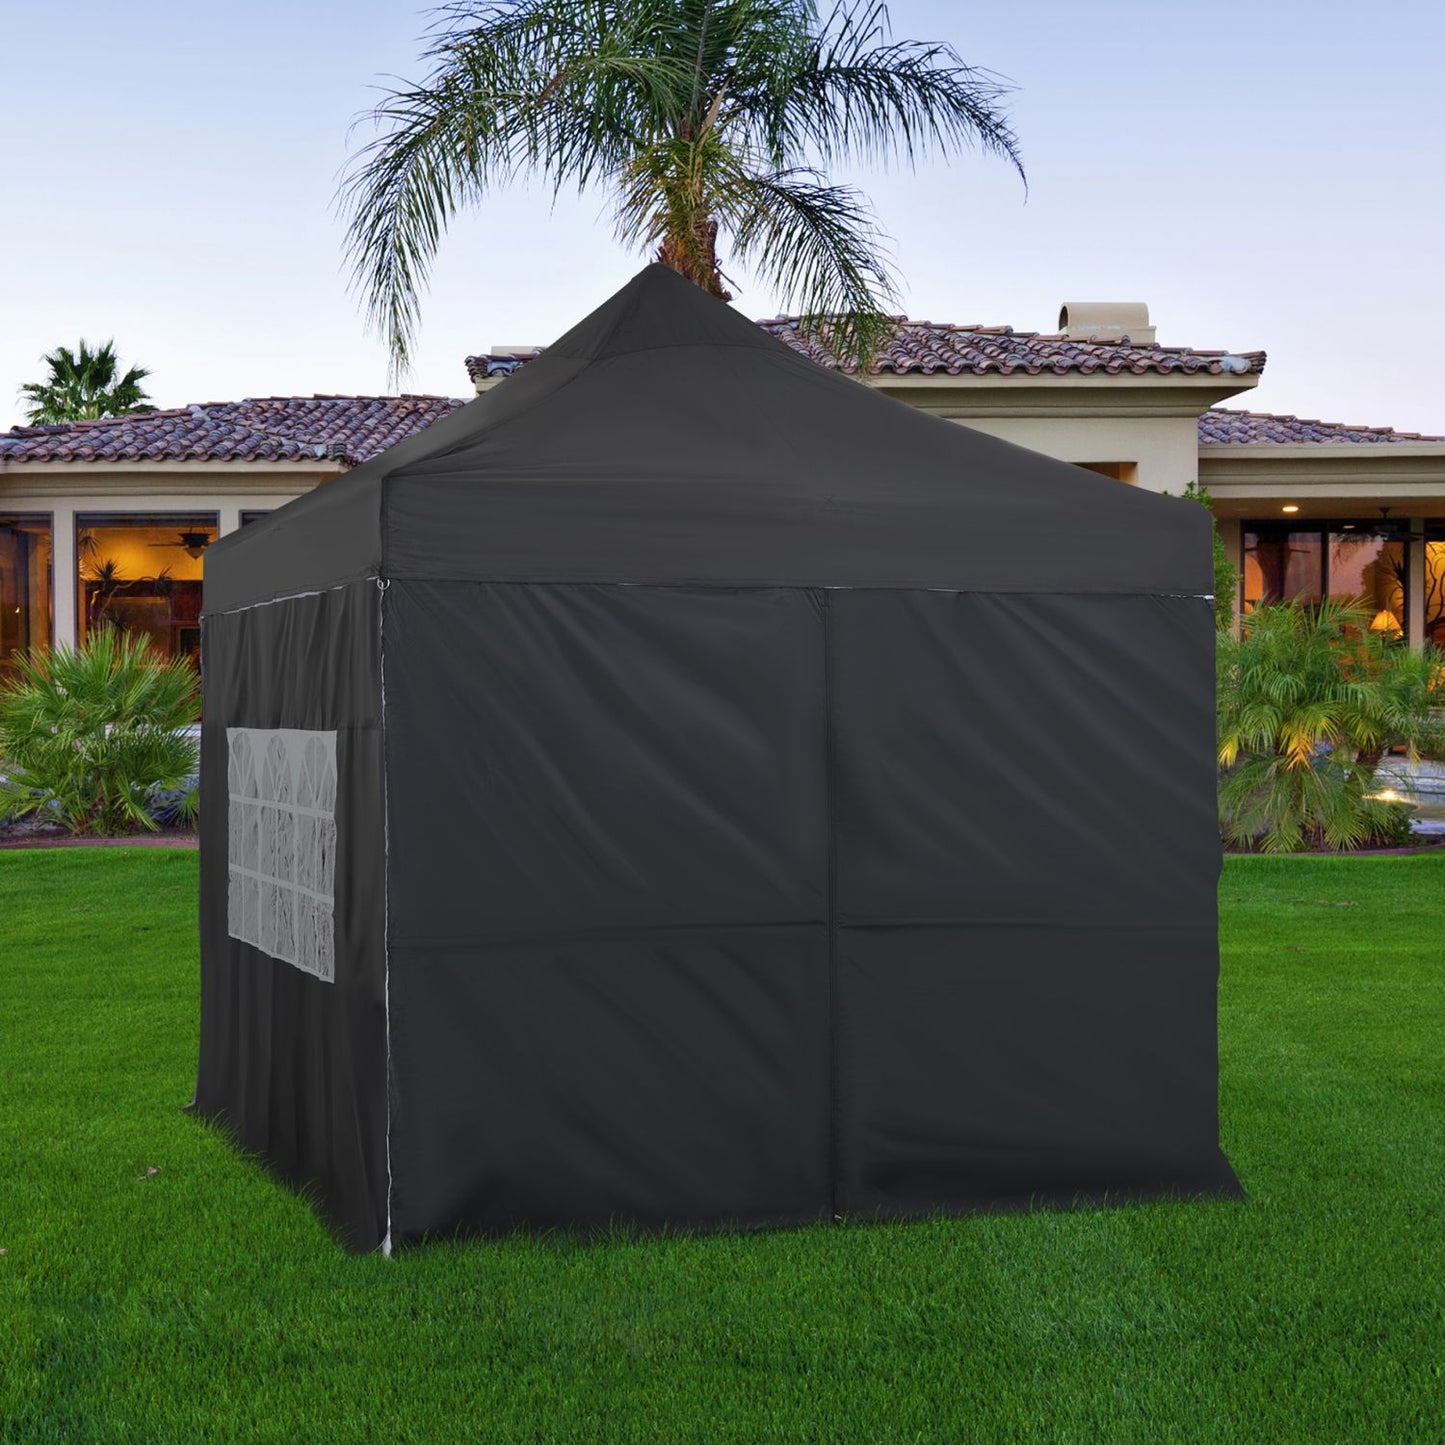 10 x 10 FT. Pop Up Canopy Tent with Windows Sidewalls, 3 Adjustable Heights, with Wheeled Bag